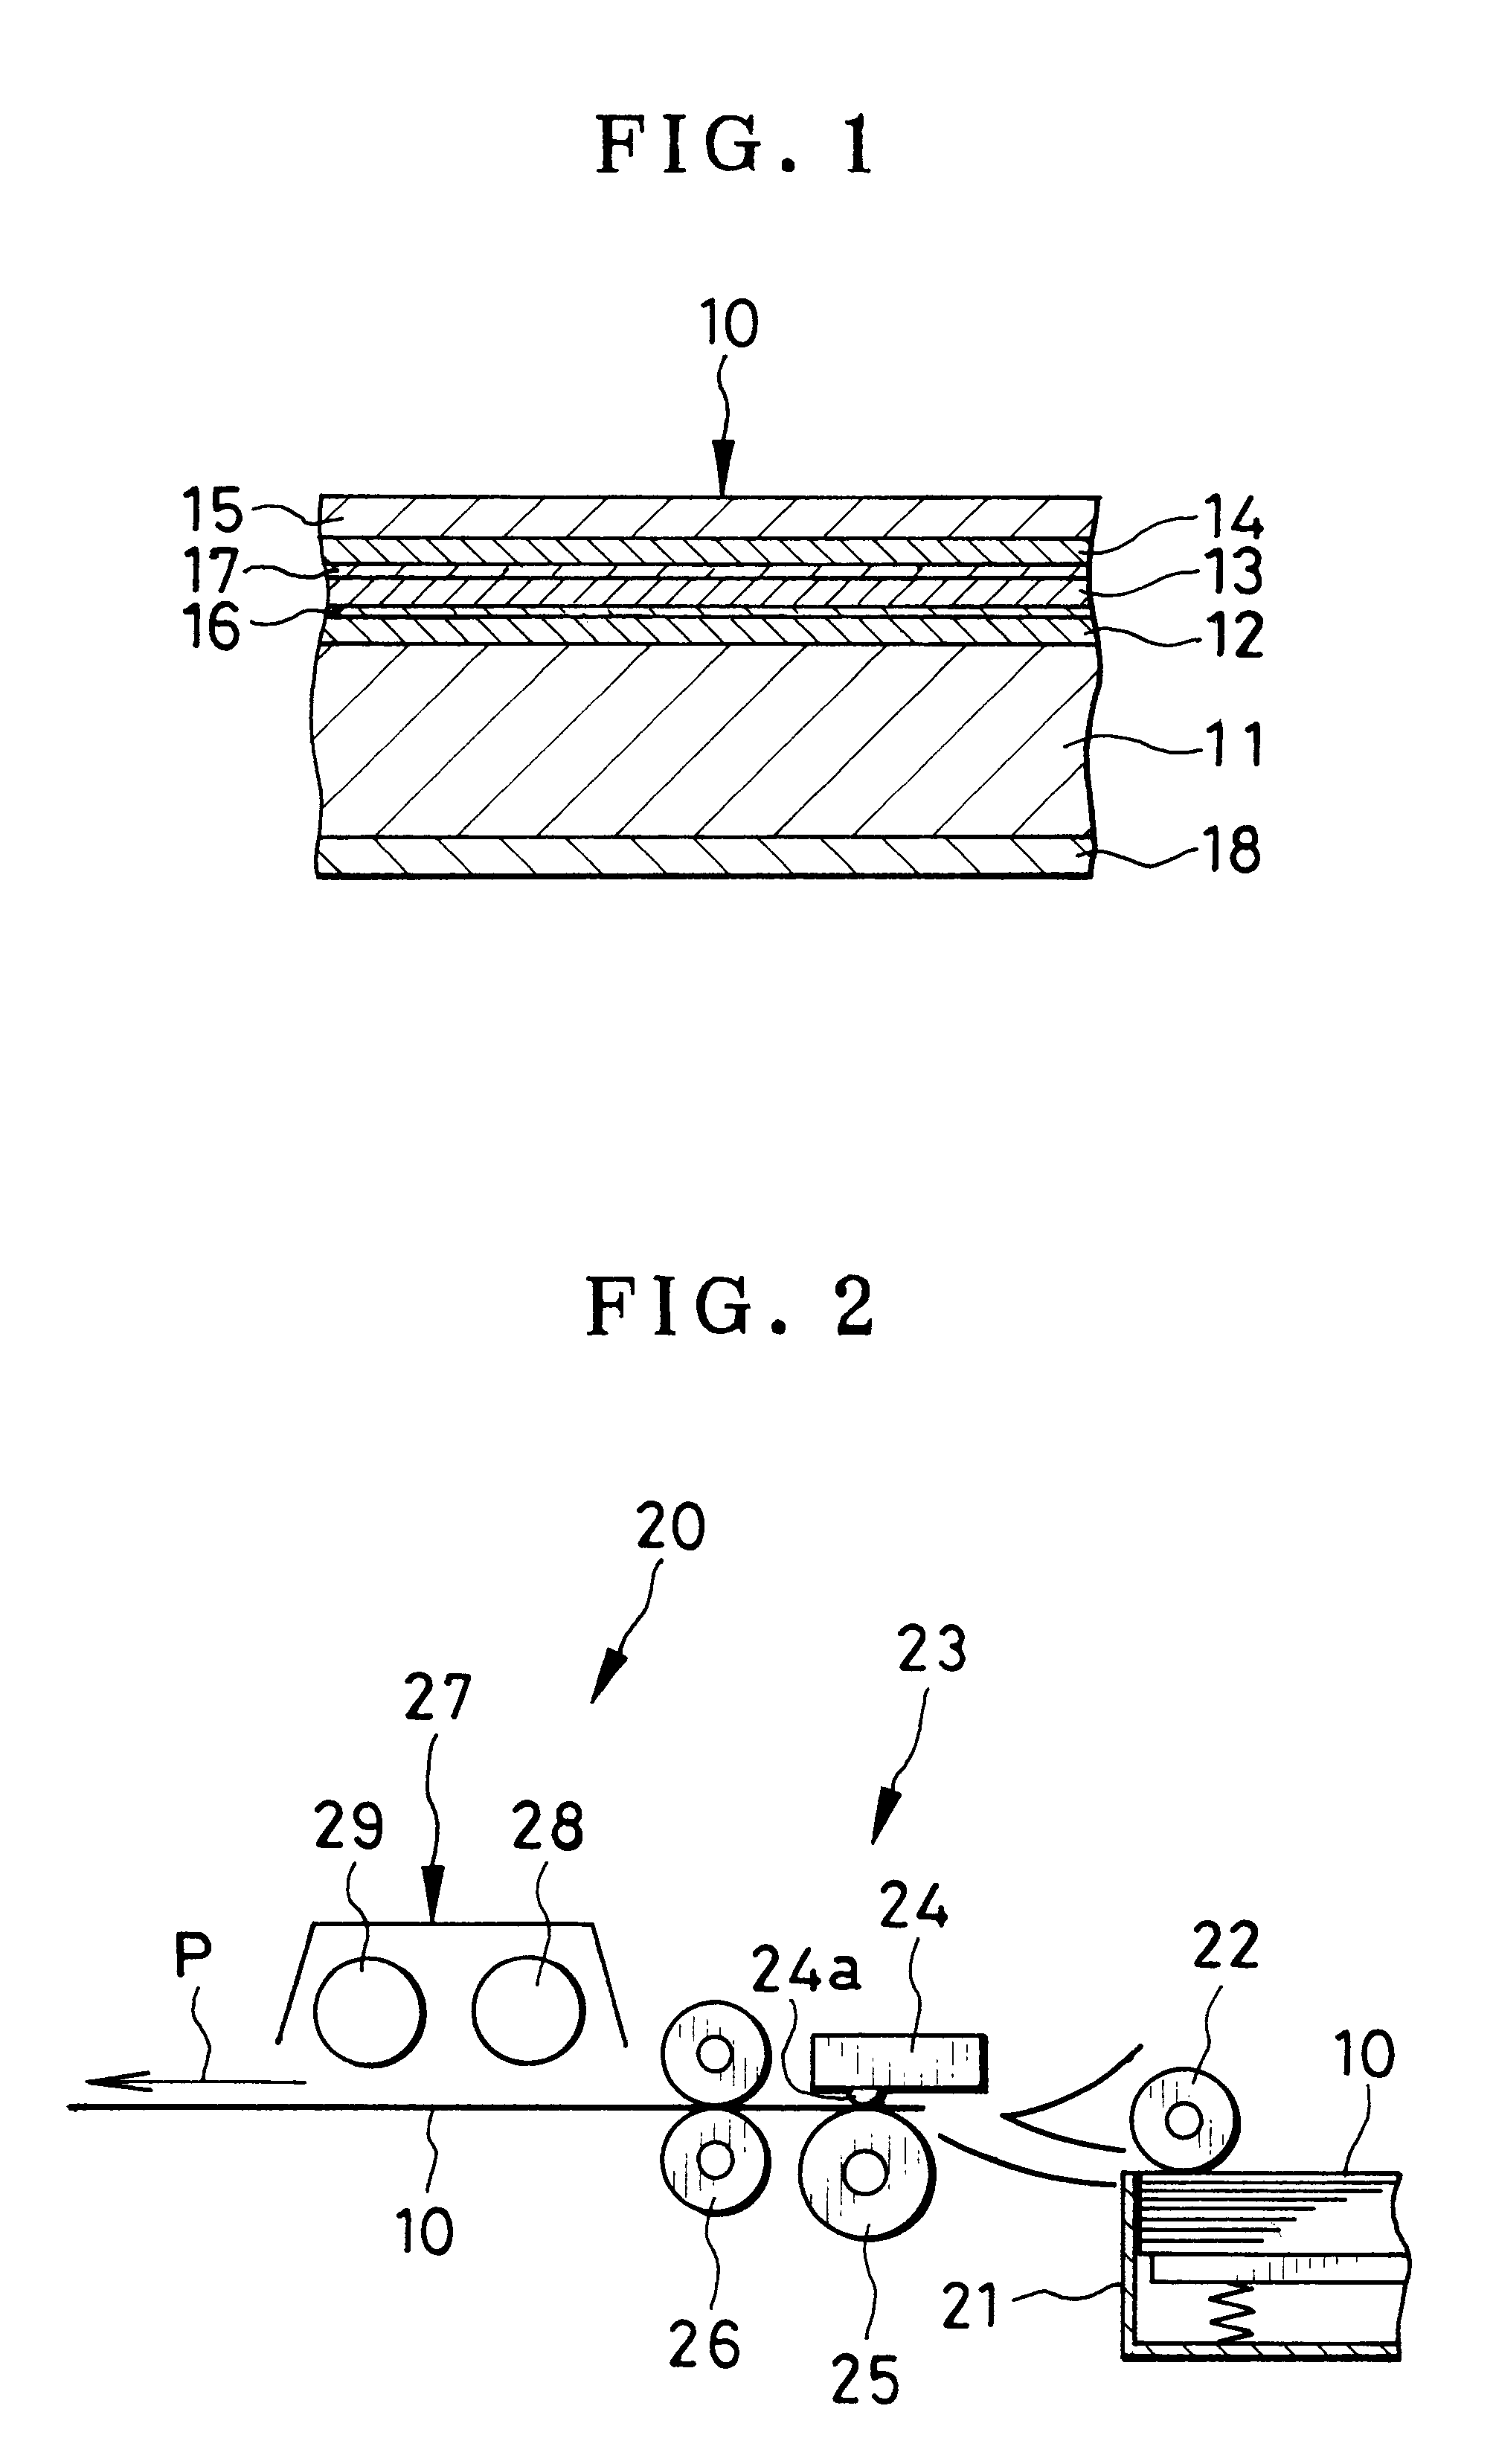 Printer calibration method and apparatus therefor